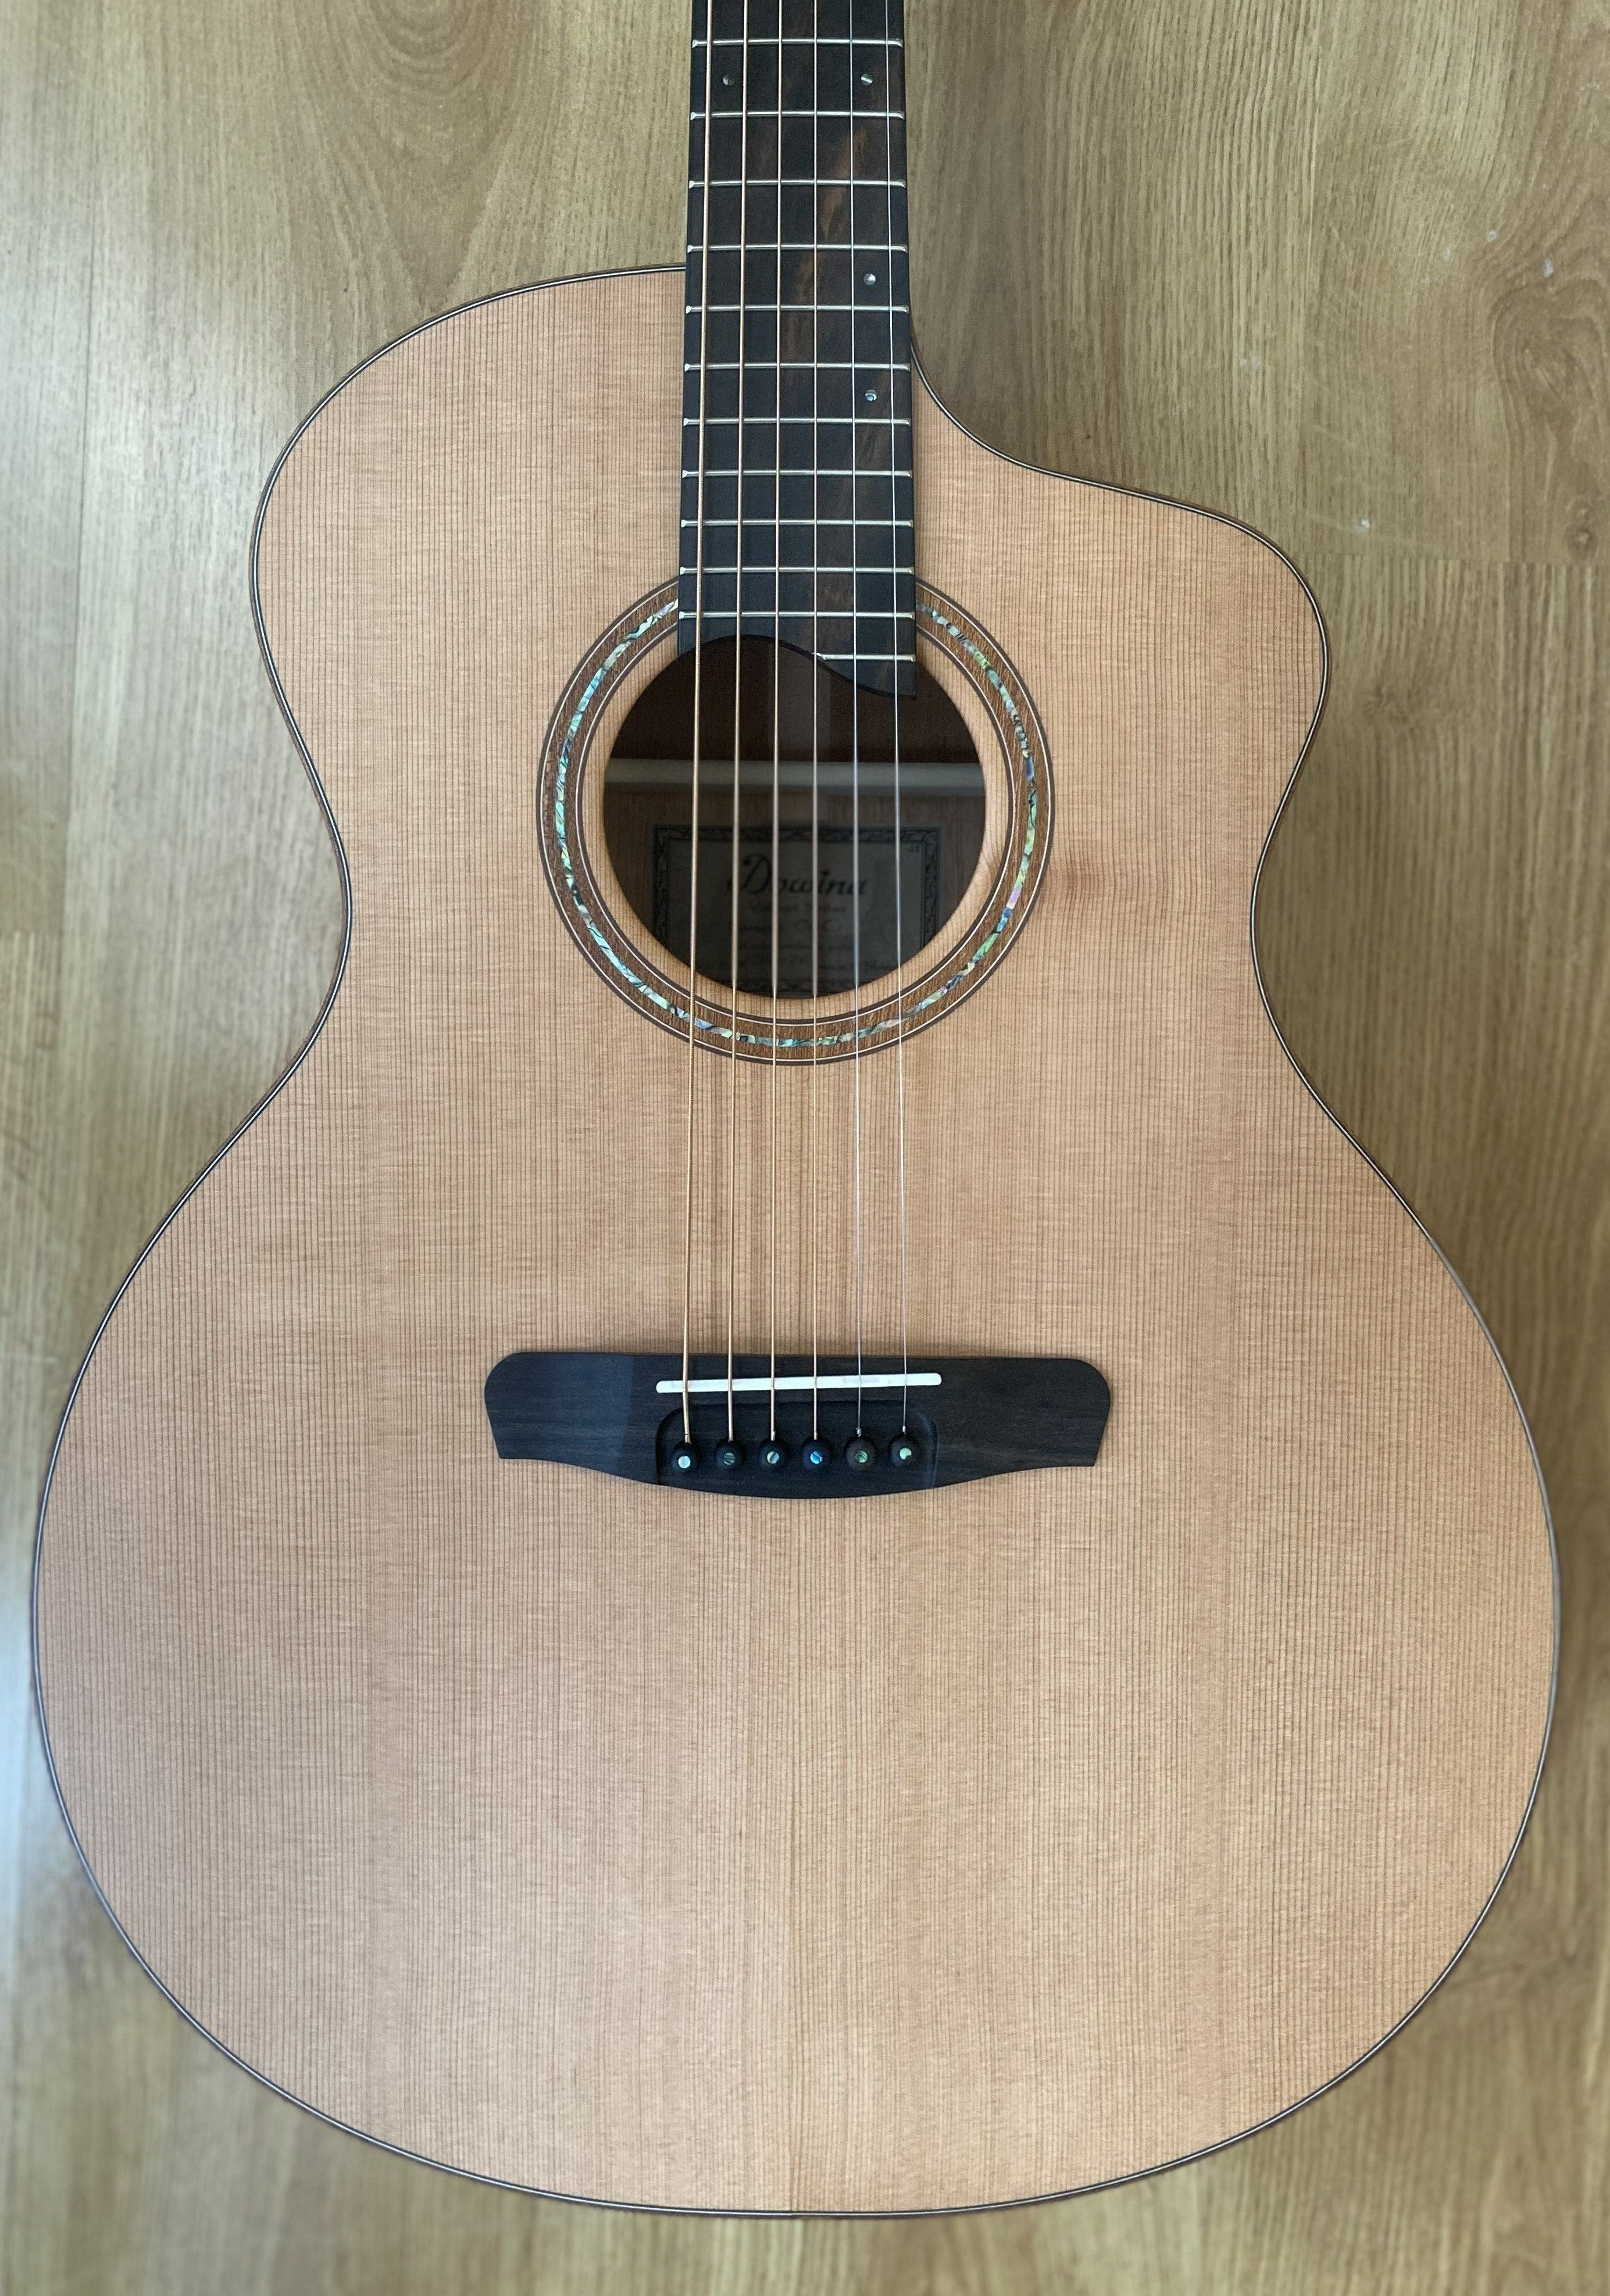 Dowina Mahogany GAC Deluxe (Torrified Gloss Swiss Moon Spruce), Acoustic Guitar for sale at Richards Guitars.